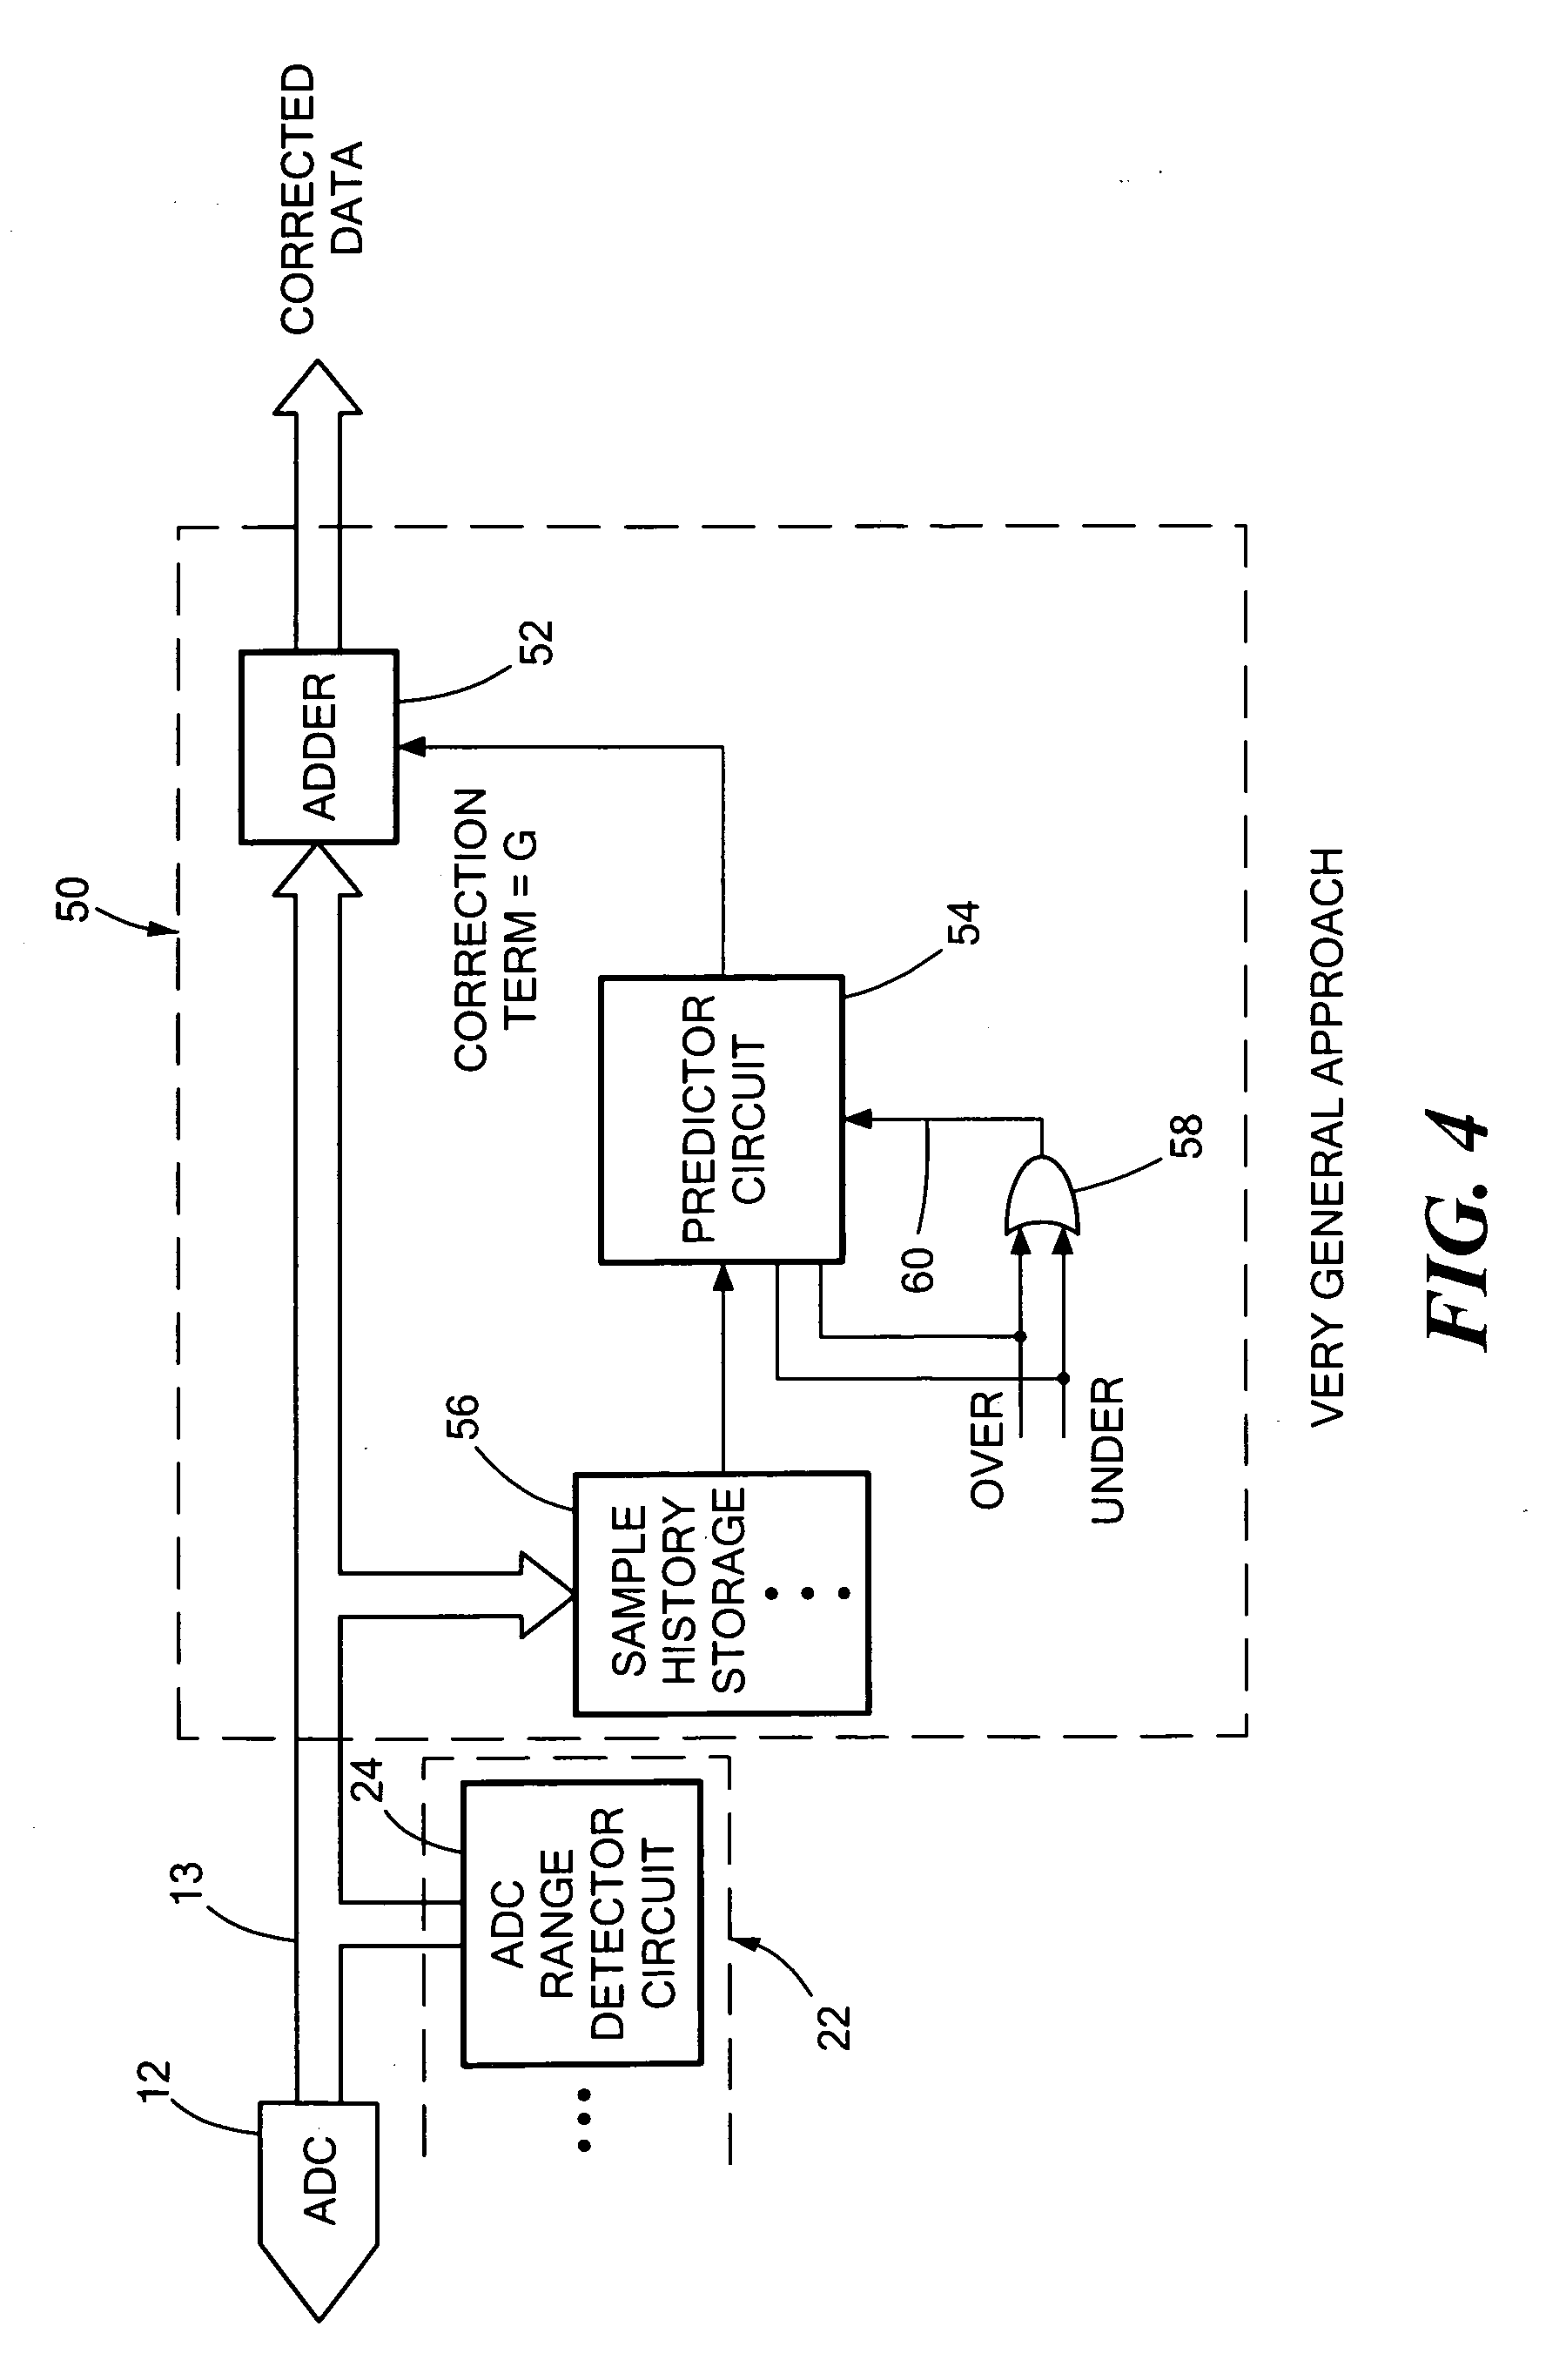 Automatic range shift system and method for an Analog to Digital Converter